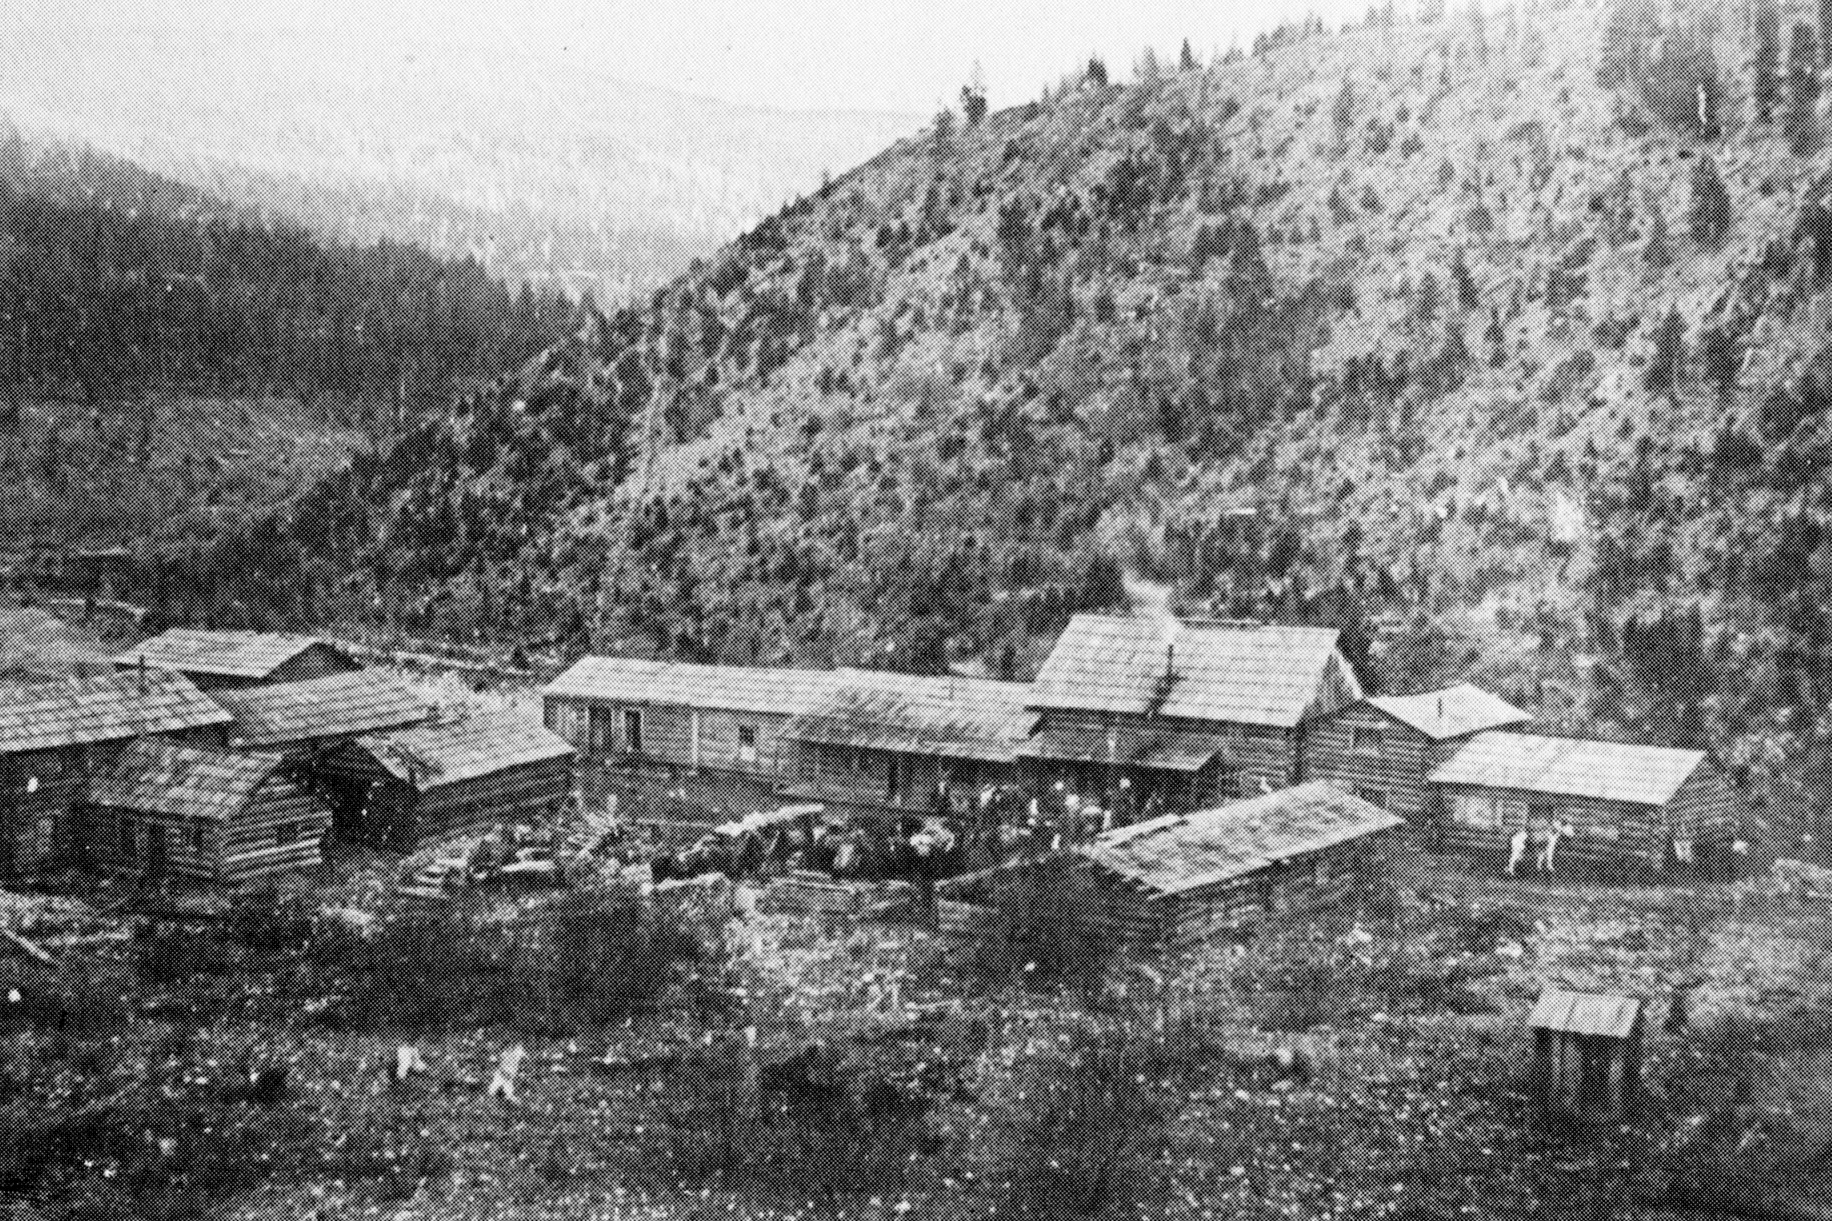 Gold Trails and Ghost Towns, An extended look at early Prince Rupert, BC